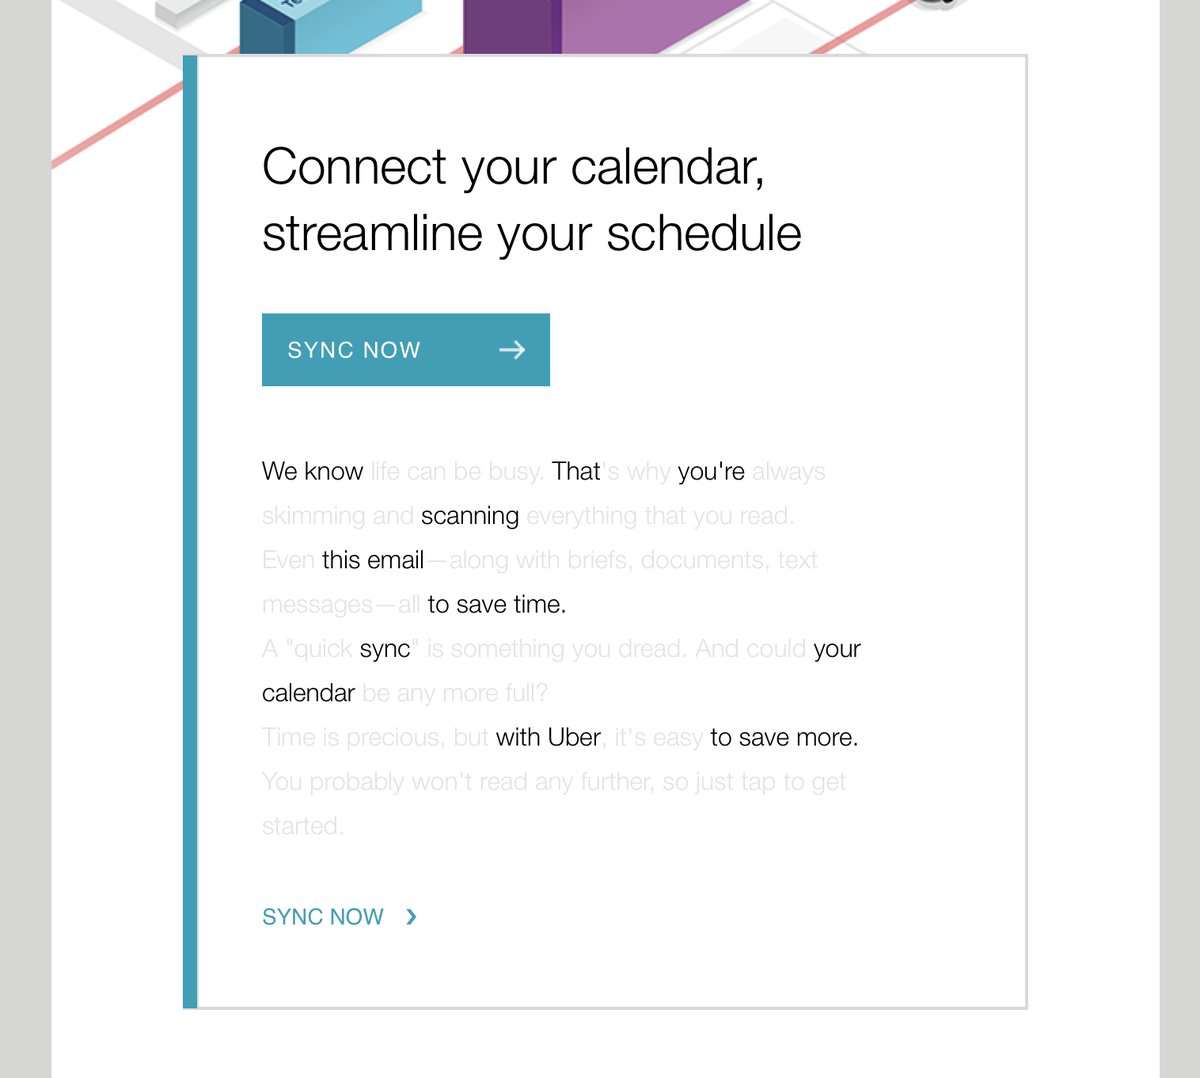 Email marketing campaign on calendar integration by Uber